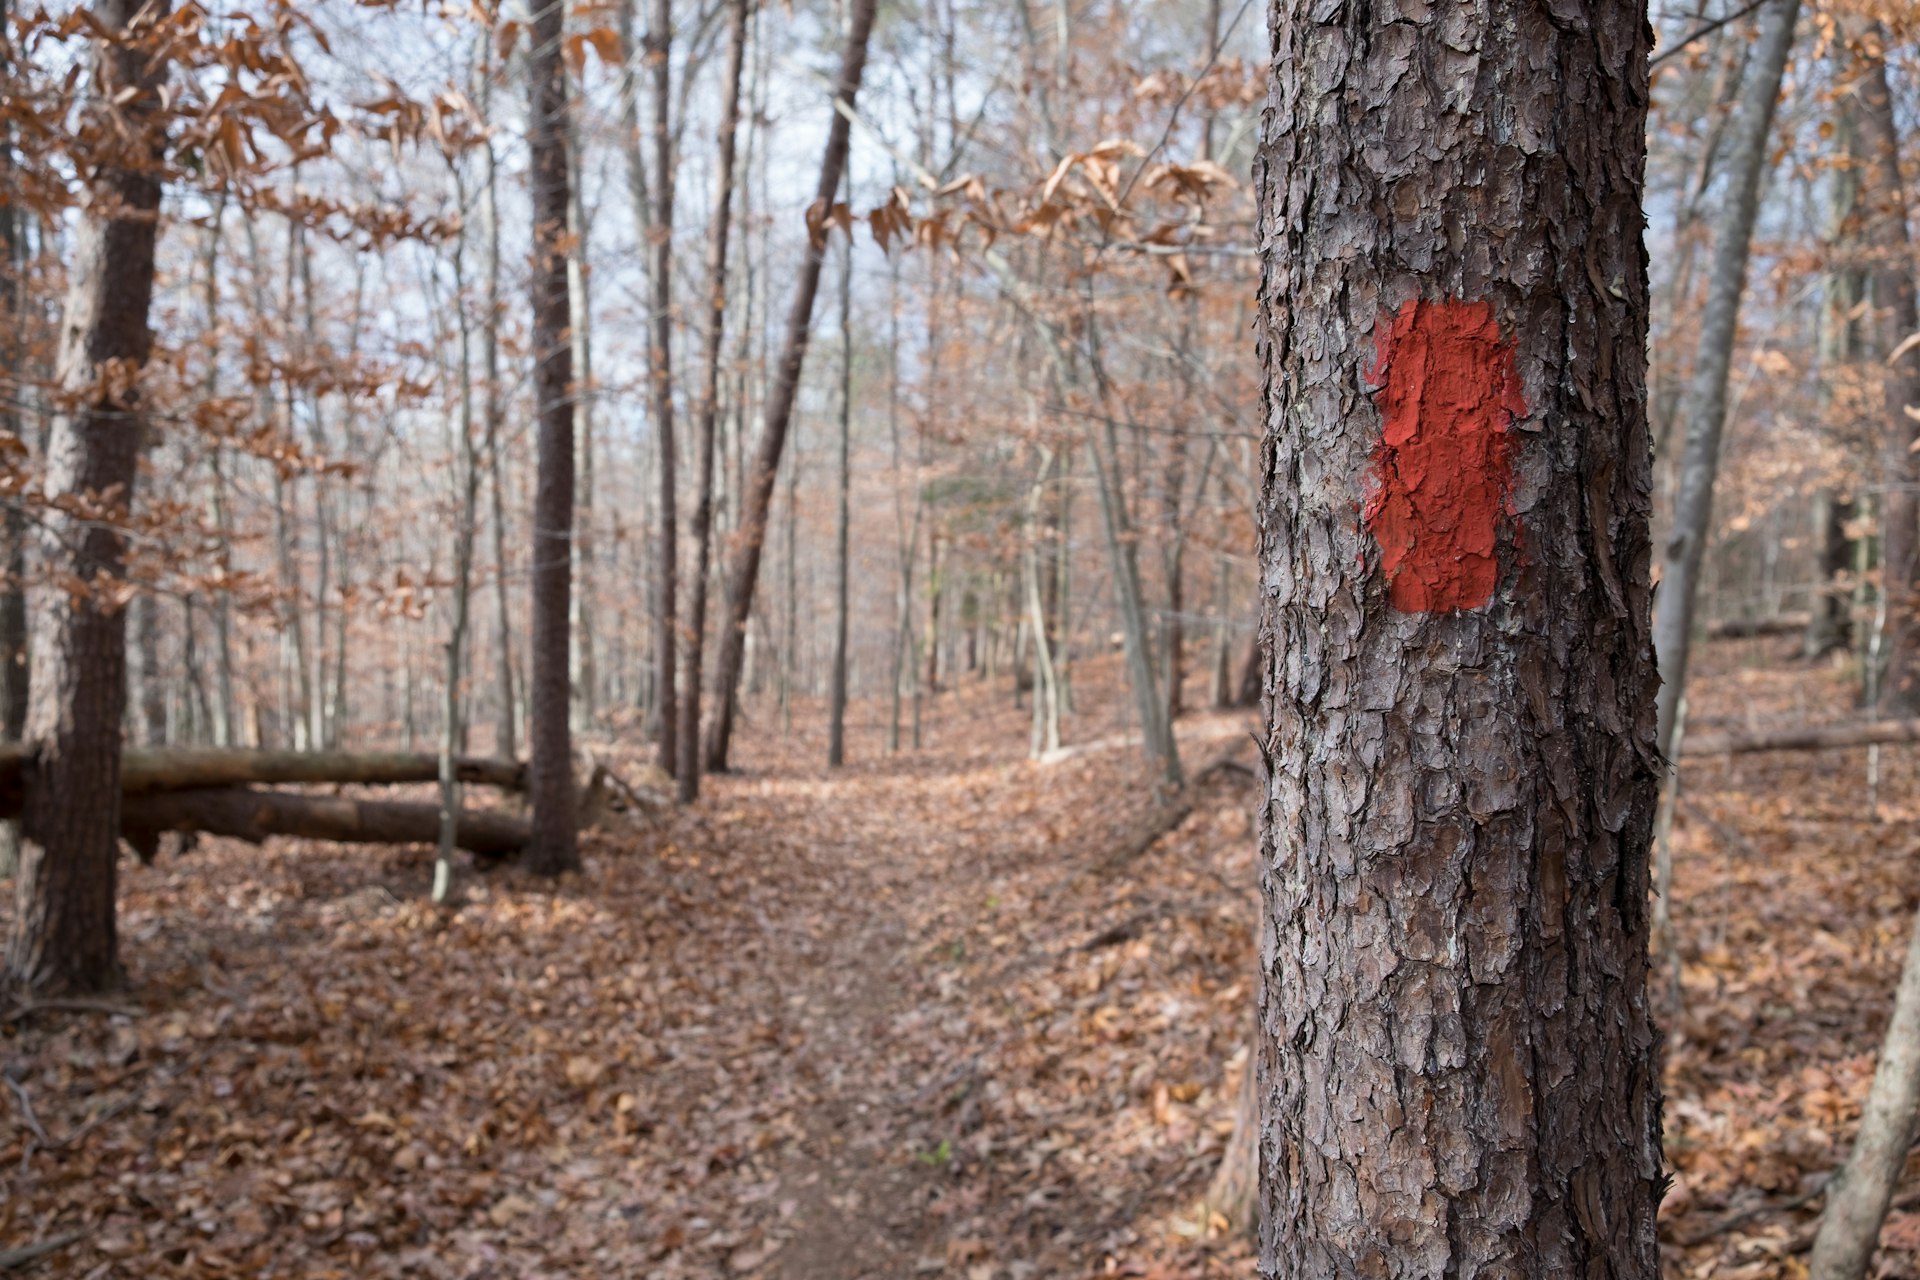 RED PAINT TRAIL MARKING ON A TREE  / DIRECTION FOR HIKERS AND TREKKERS / PRINCE WILLIAM FOREST PARK VIRGINIA USA